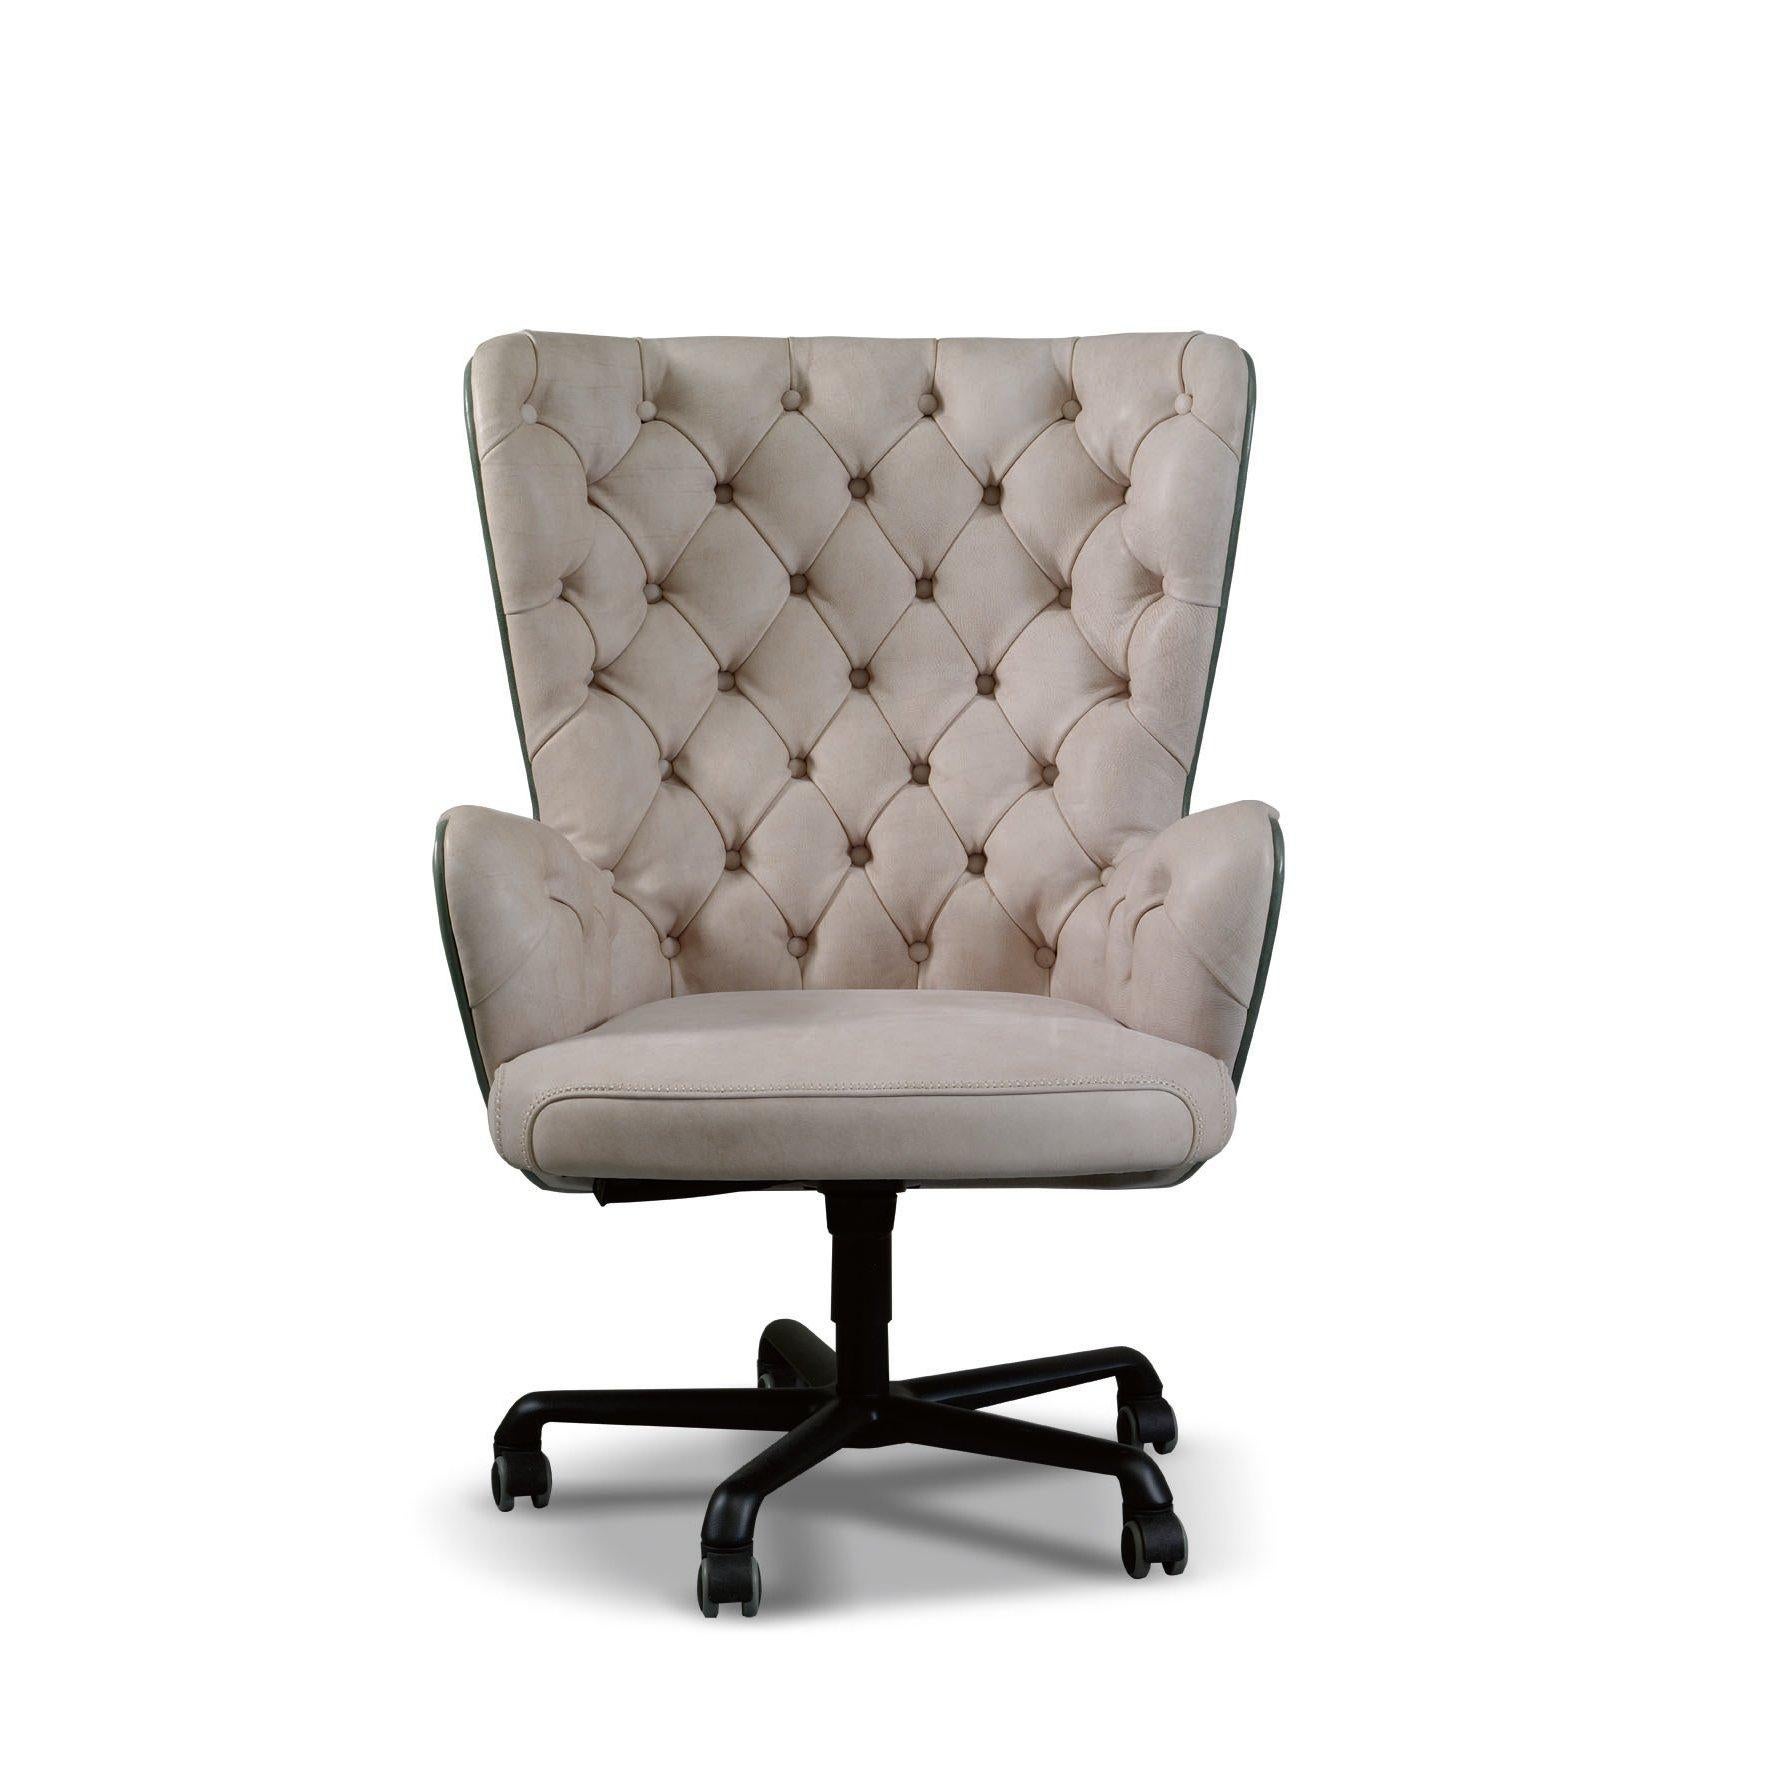 The Sophia Office chair Swivel is a modern Italian designer swivel chair handmade in upholstered leather in cream. This luxury modern furniture collection features wood furniture upholstered in Italian leather or exotic materials such as goat skin